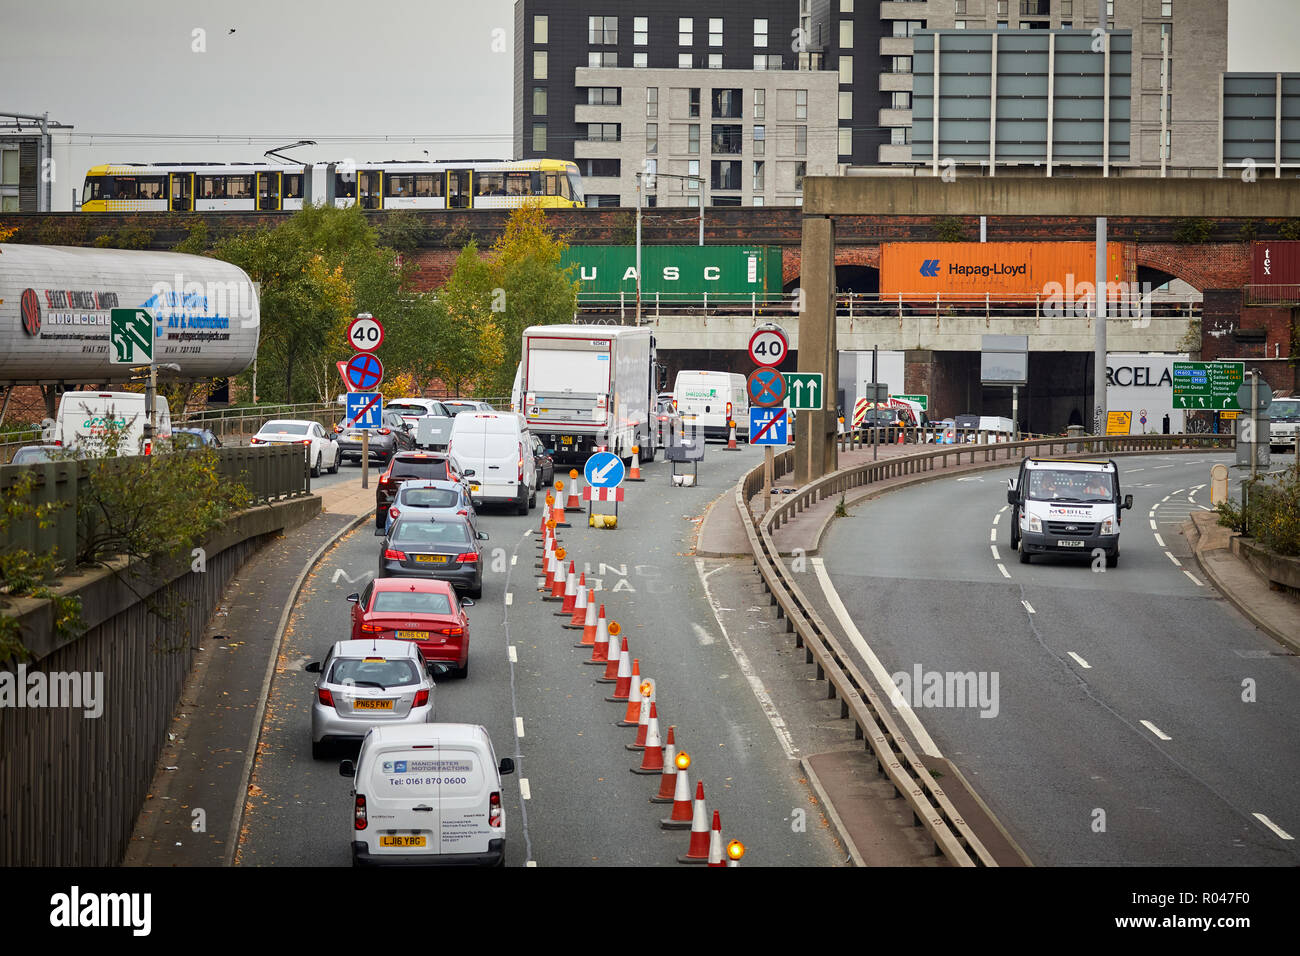 Roadworks creating busy traffic queue jams in one direction  on A57 M  The Mancunian Way  two mile long elevated motorway  Manchester city centre Stock Photo